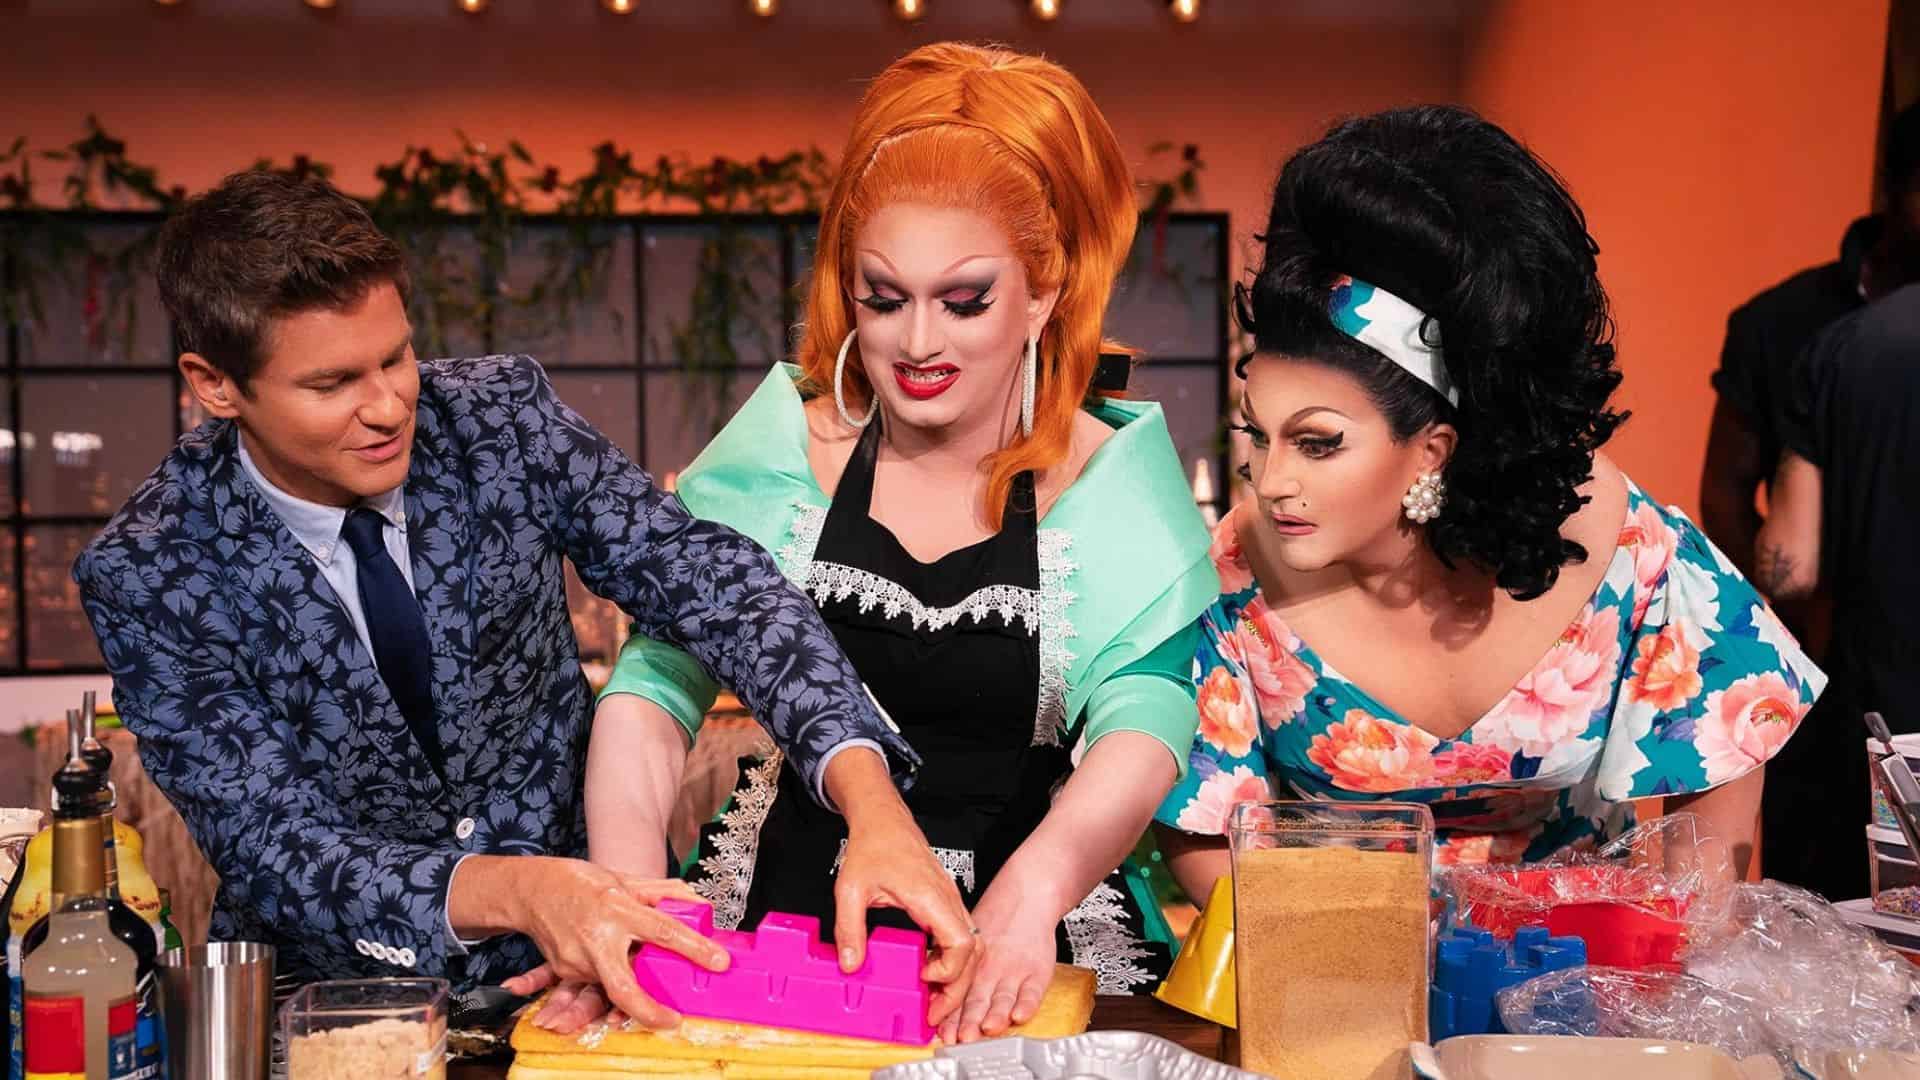 David Burtka, Jinkx Monsoon, and BenDeLaCreme decorate a cake in this image from Vox Media Studios